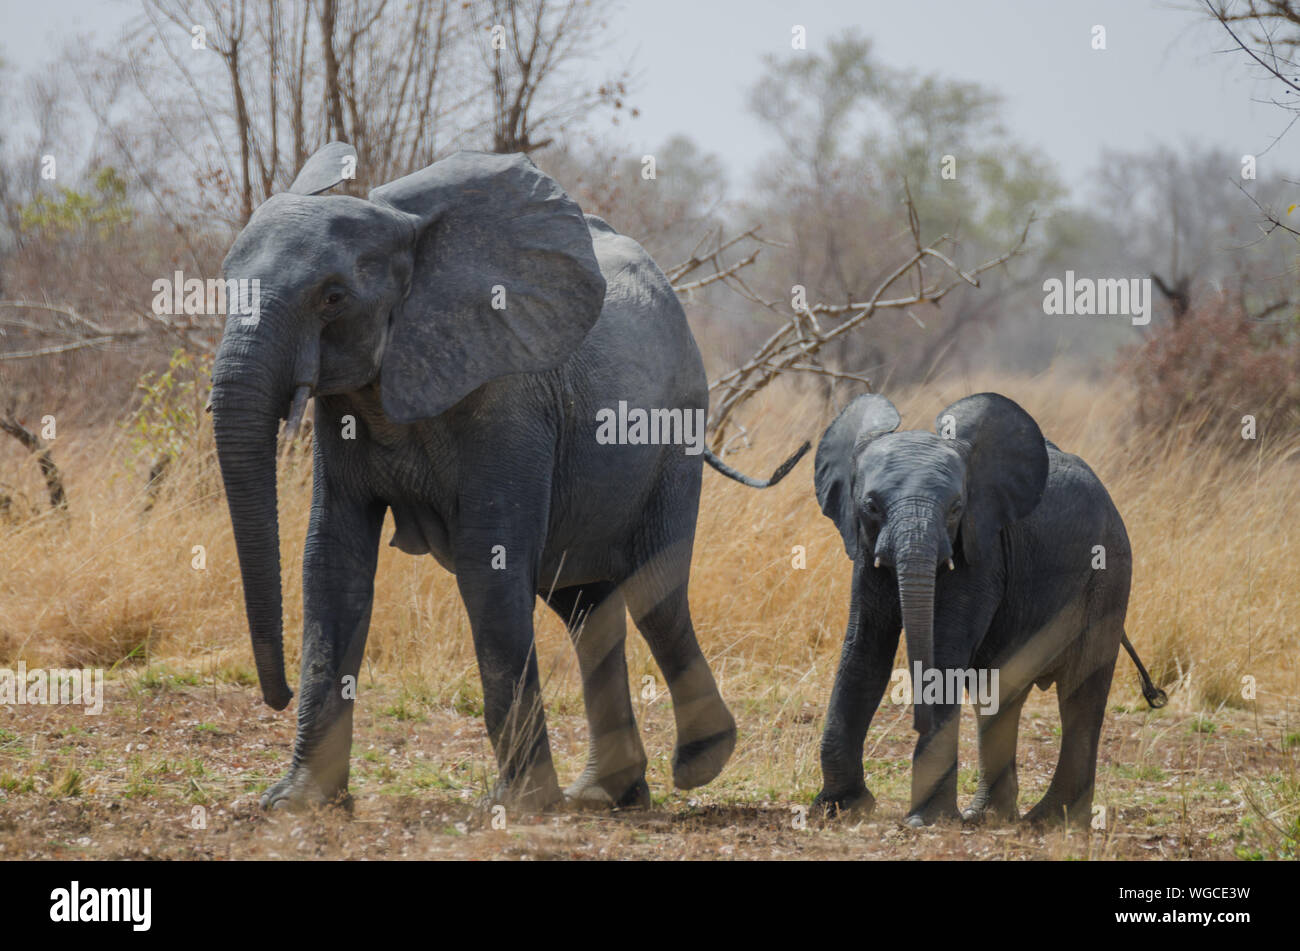 African Elephant Mother Walking With Young Child In Pednjari National Park, Benin, Africa Stock Photo